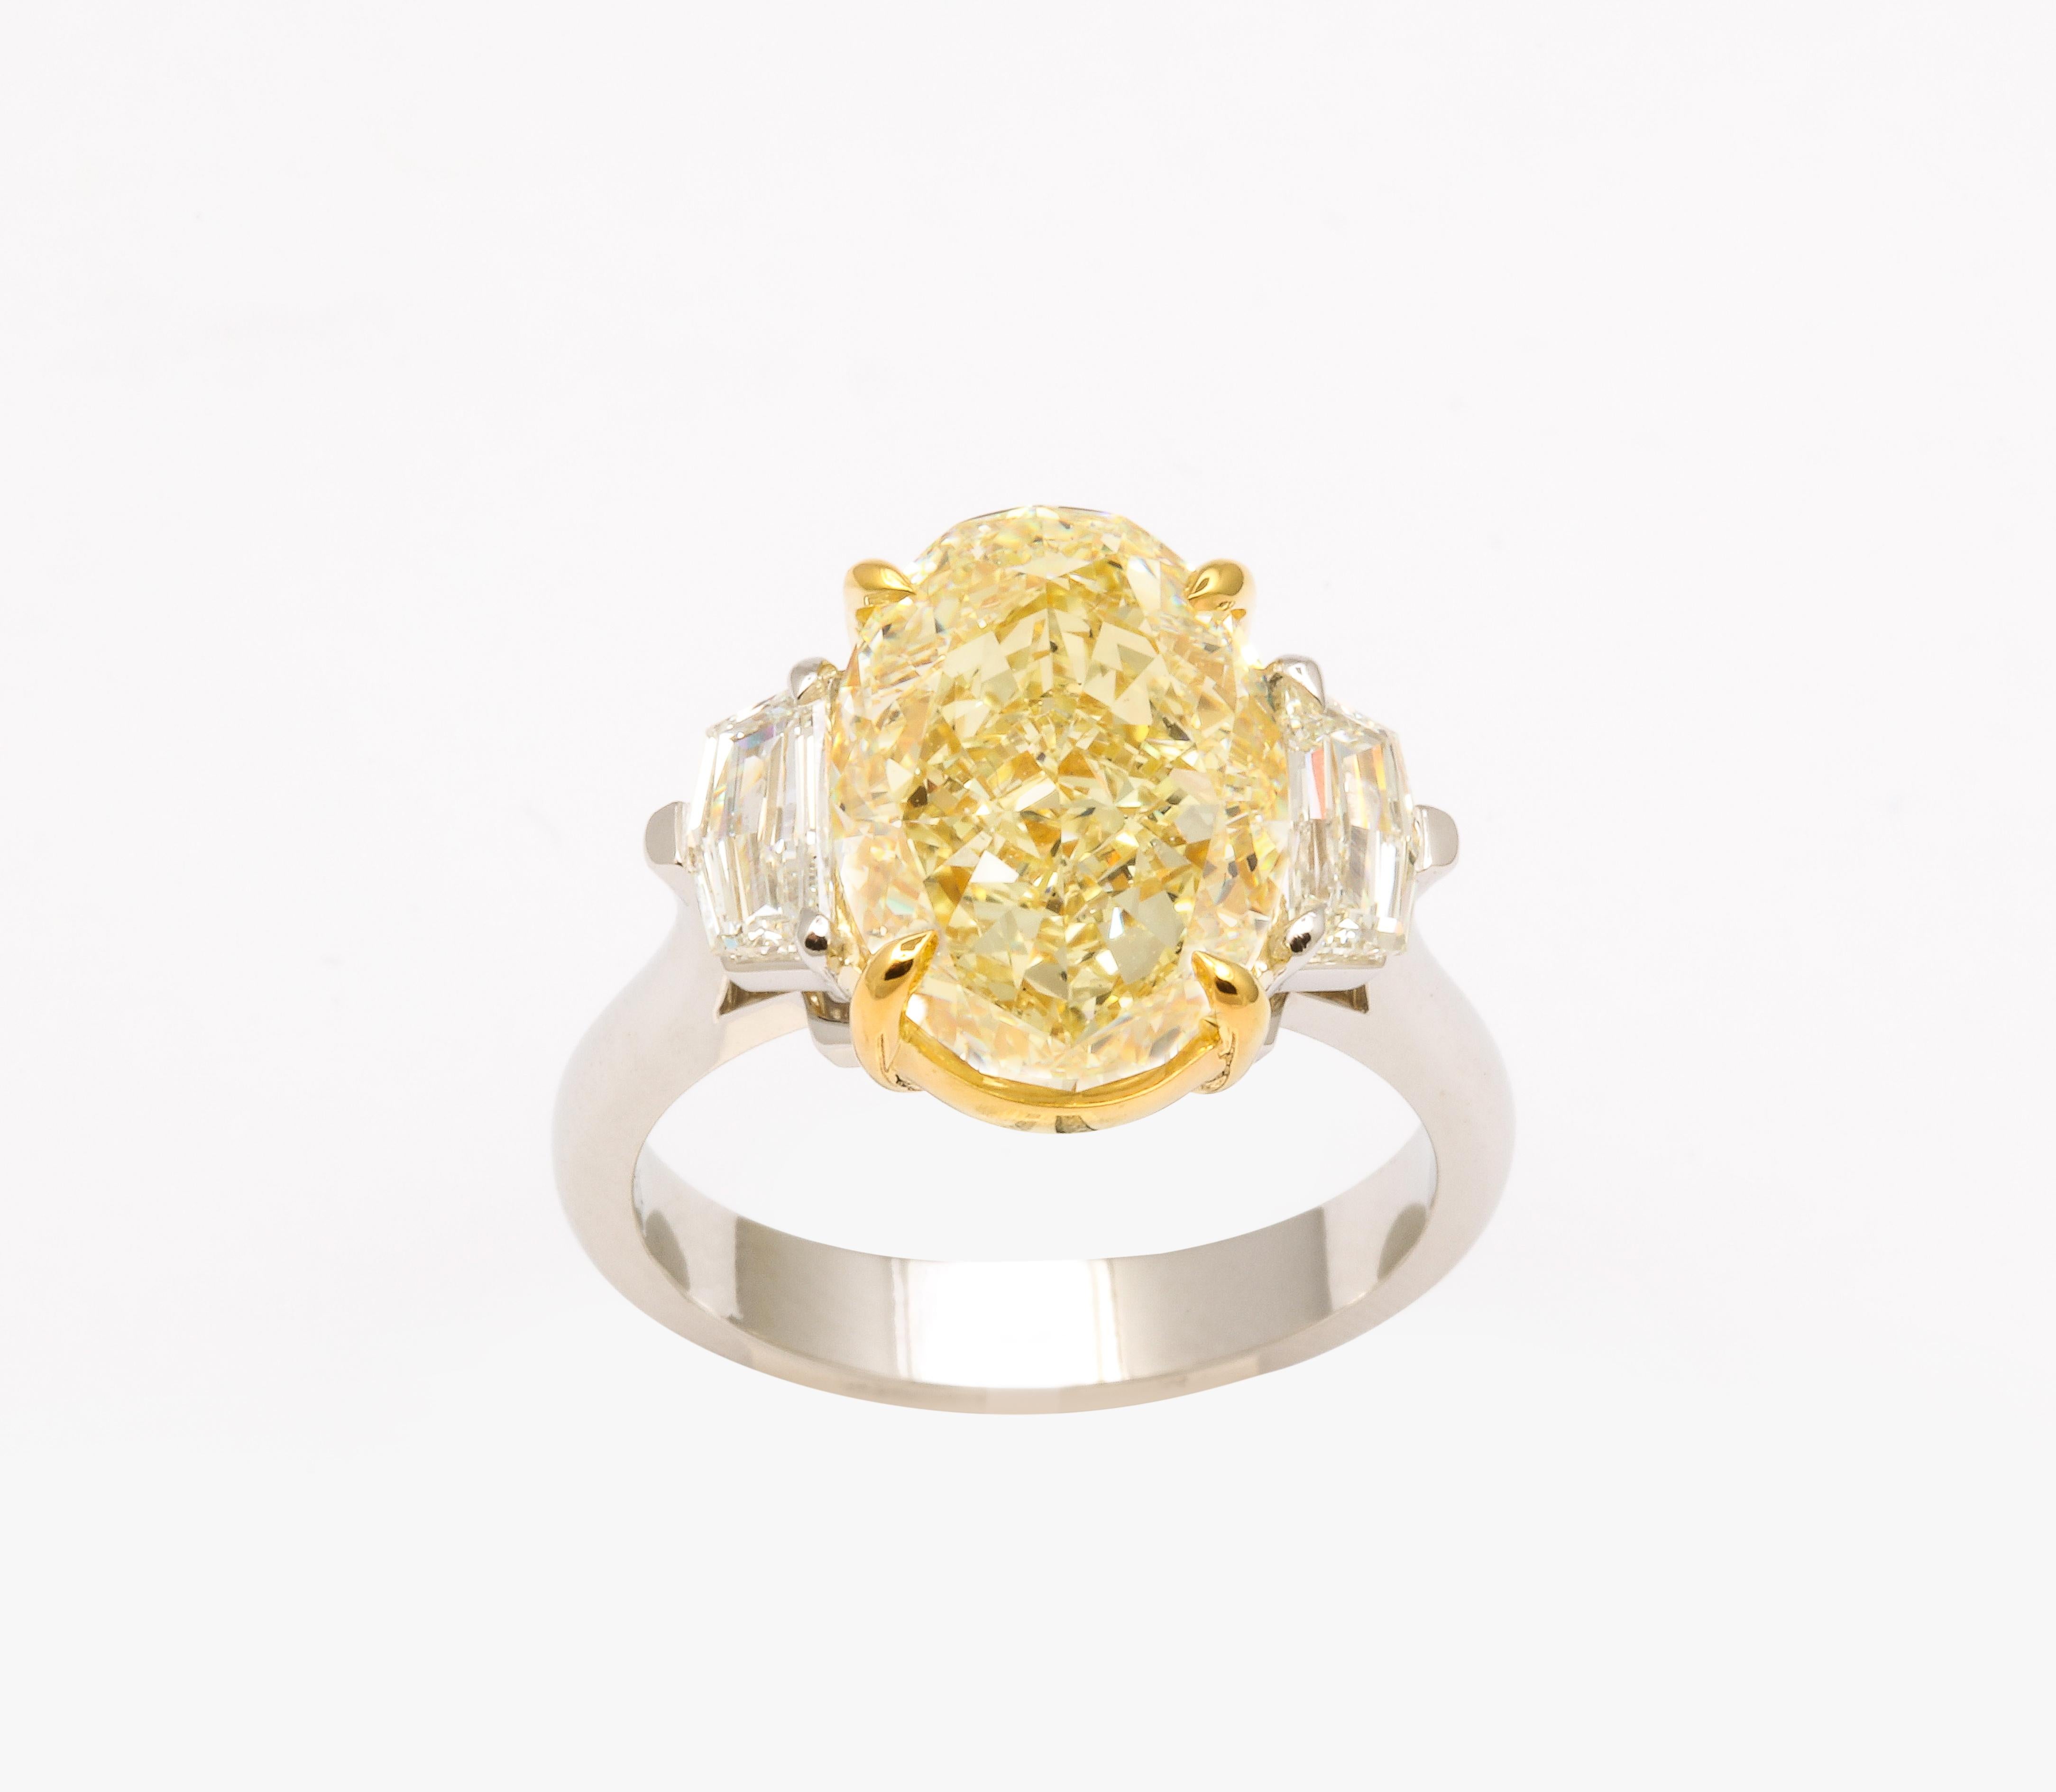 Oval Cut 6 Carat Oval Yellow Diamond Ring Gia Certified For Sale